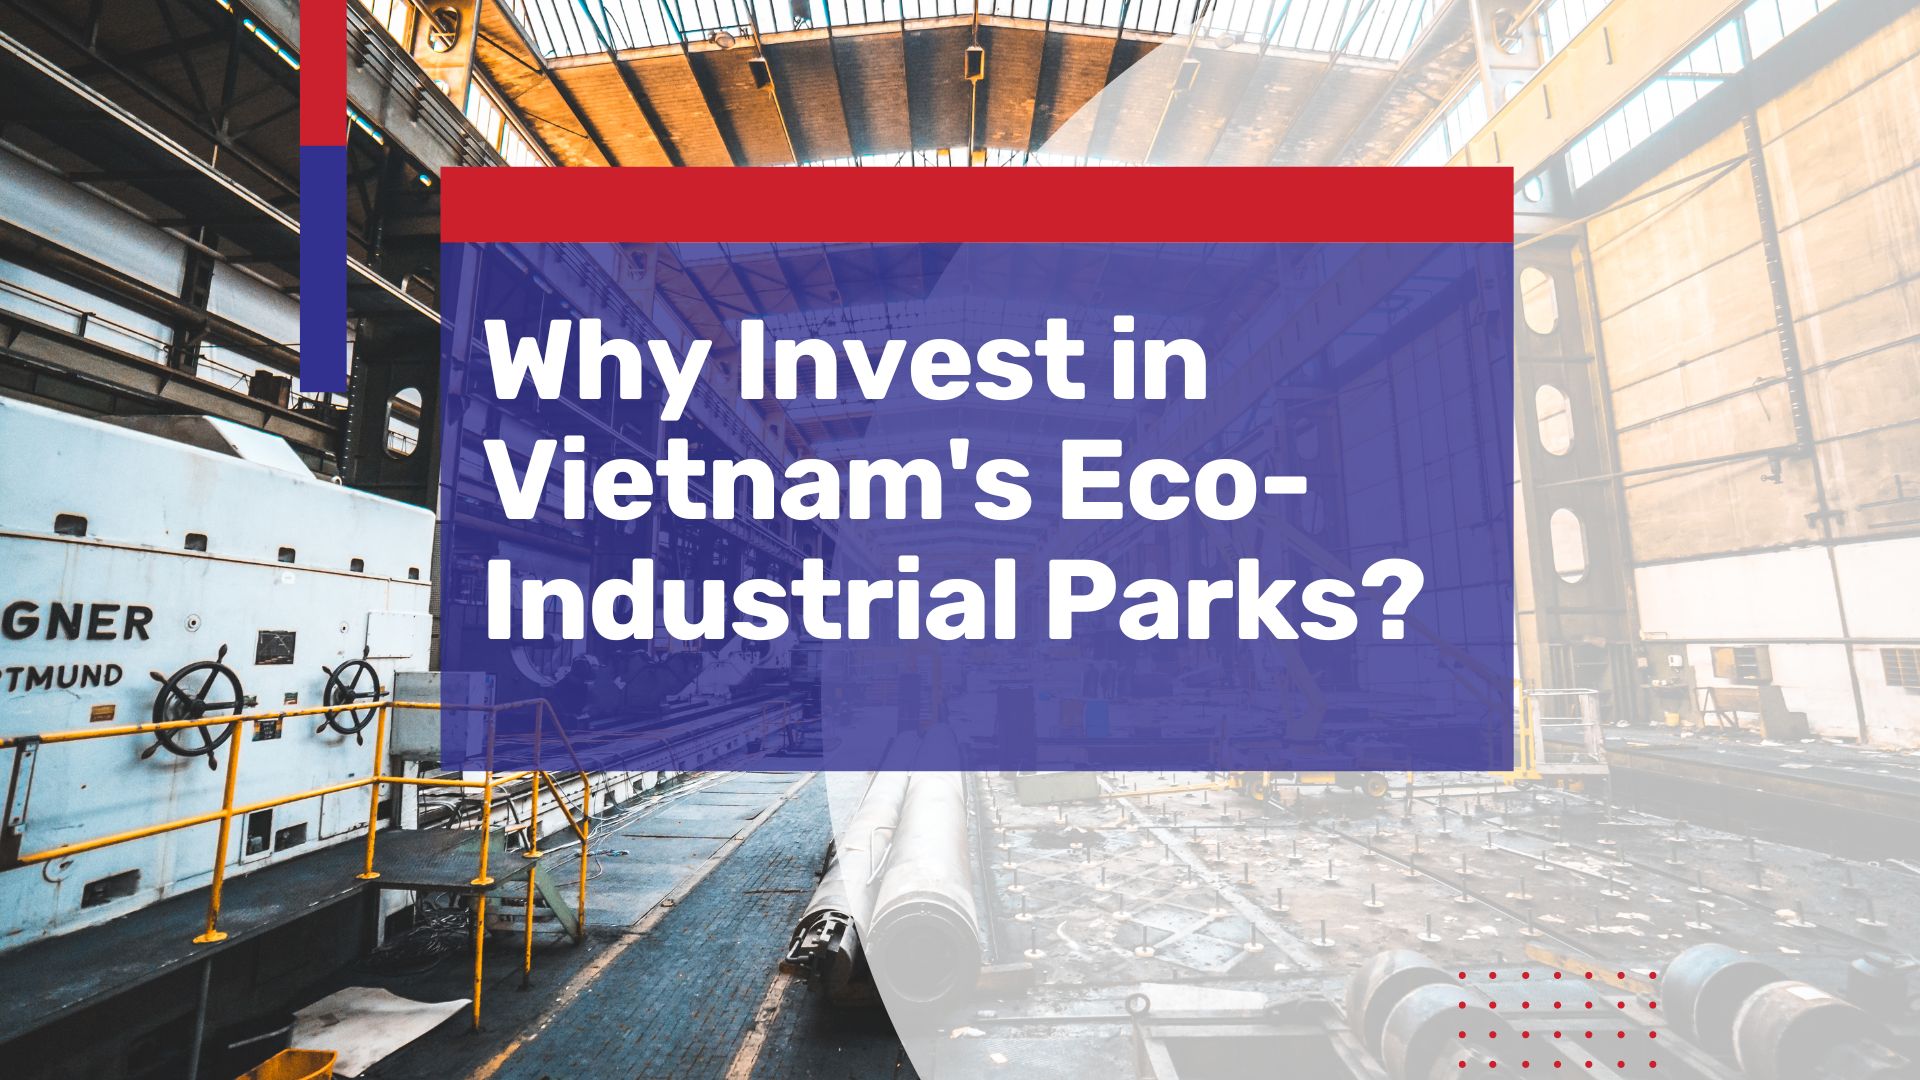 How Vietnam’s Eco-Industrial Parks (EIPs) can Entice Foreign Investors